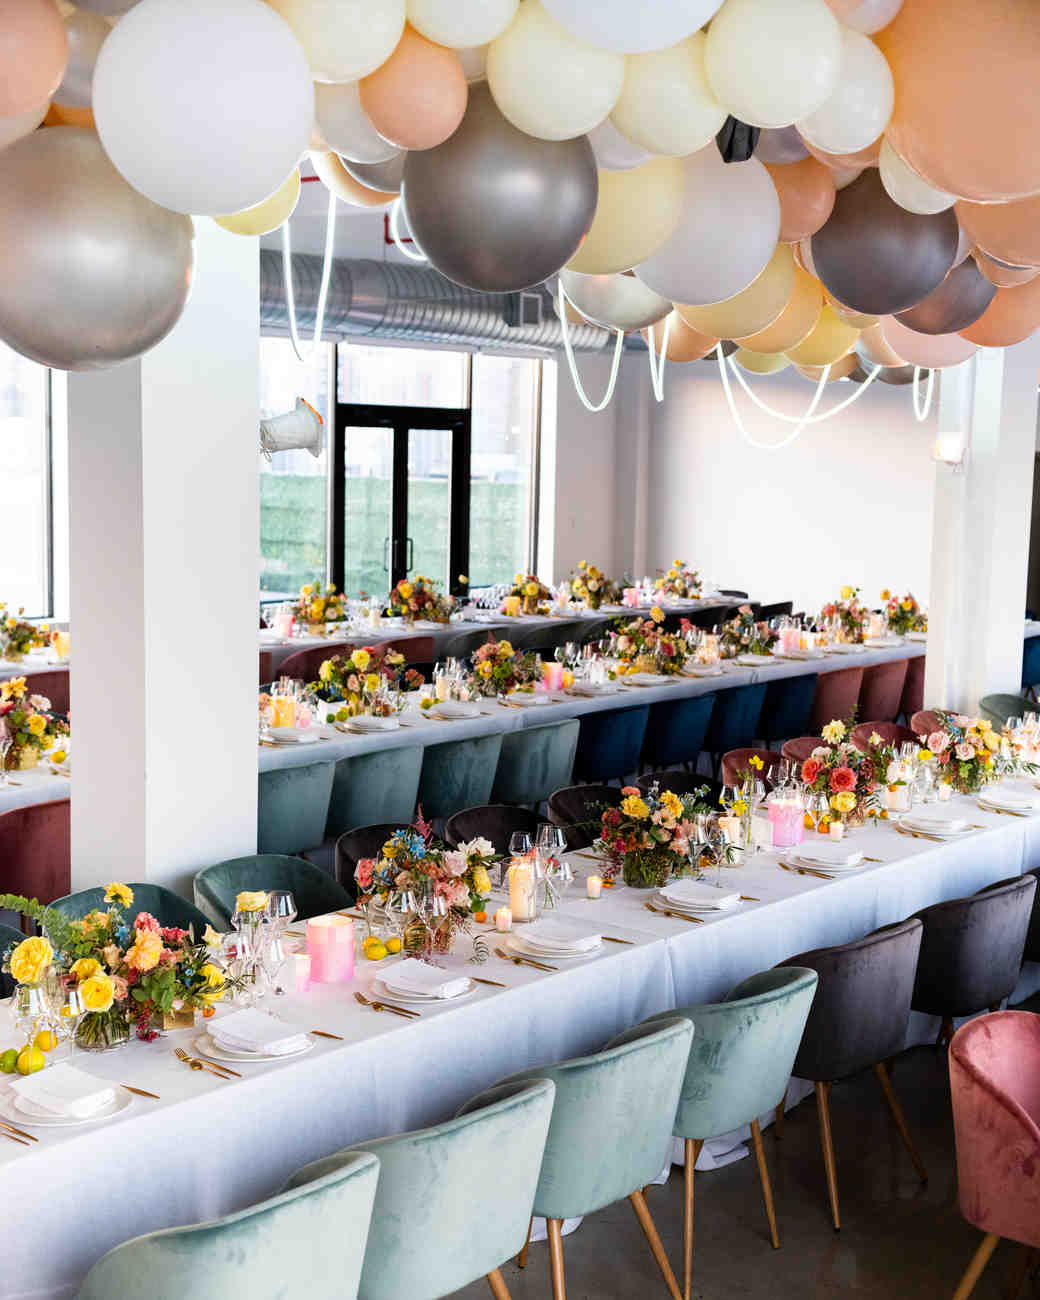 15 New Wedding Trends To Watch For In 2019 According To Planners